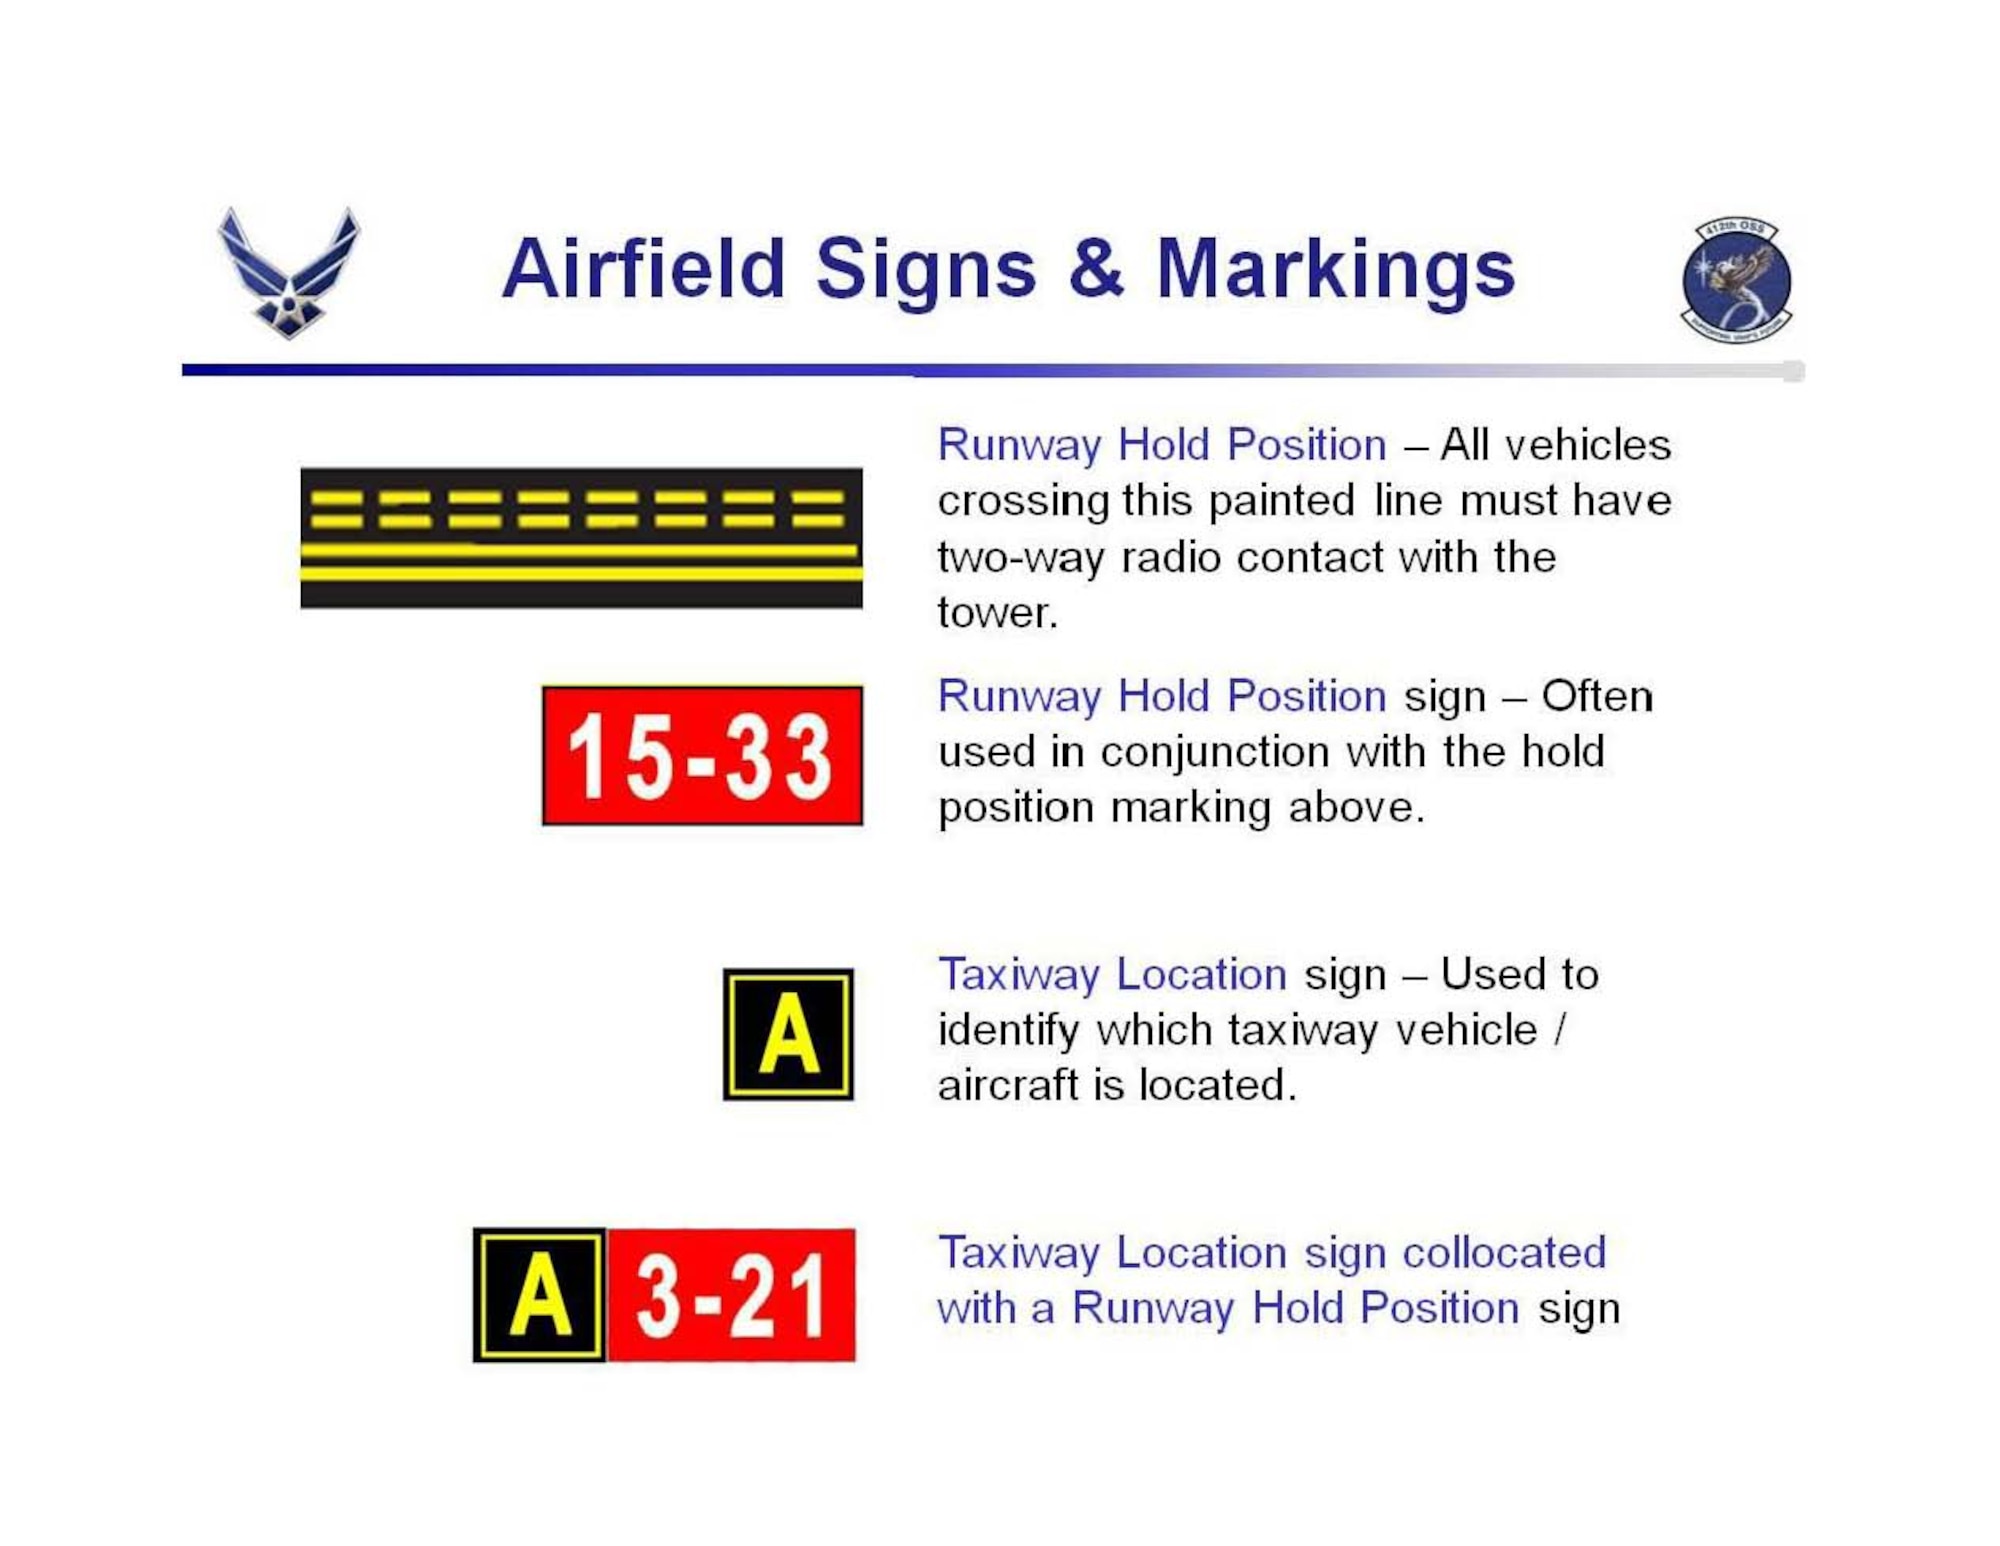 Above are basic airfield signs and markings. (Courtesy graphic)